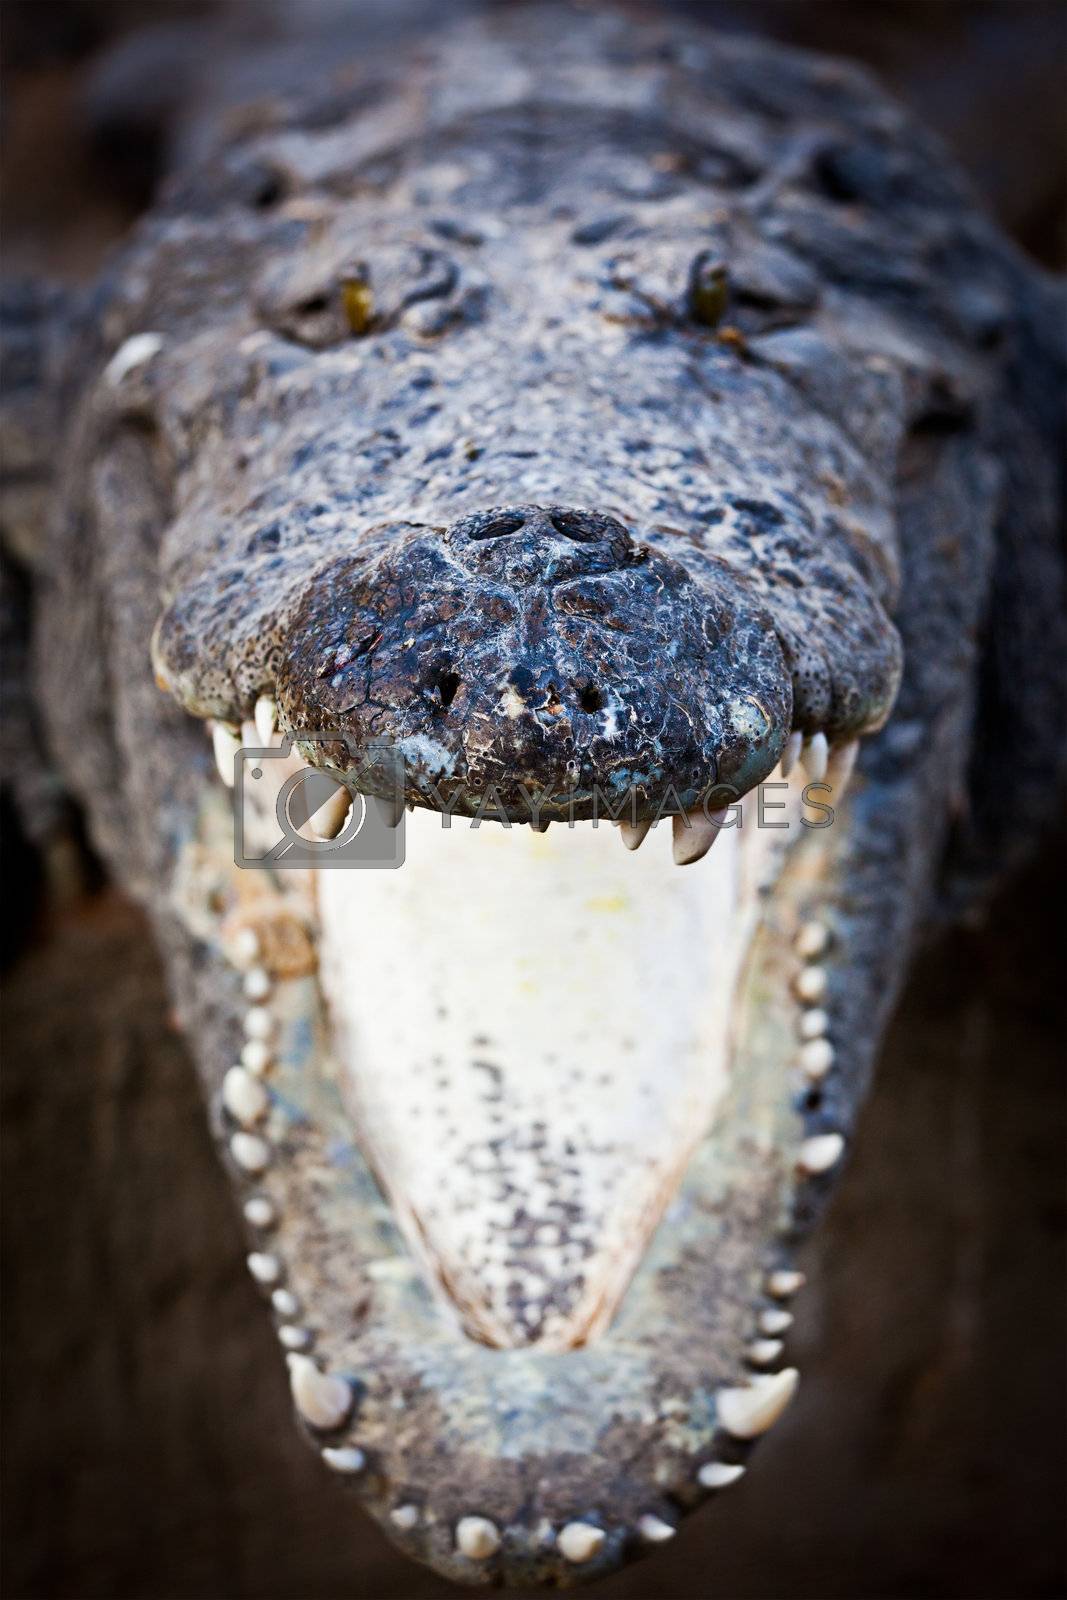 Royalty free image of Charging crocodile jaws by dimol